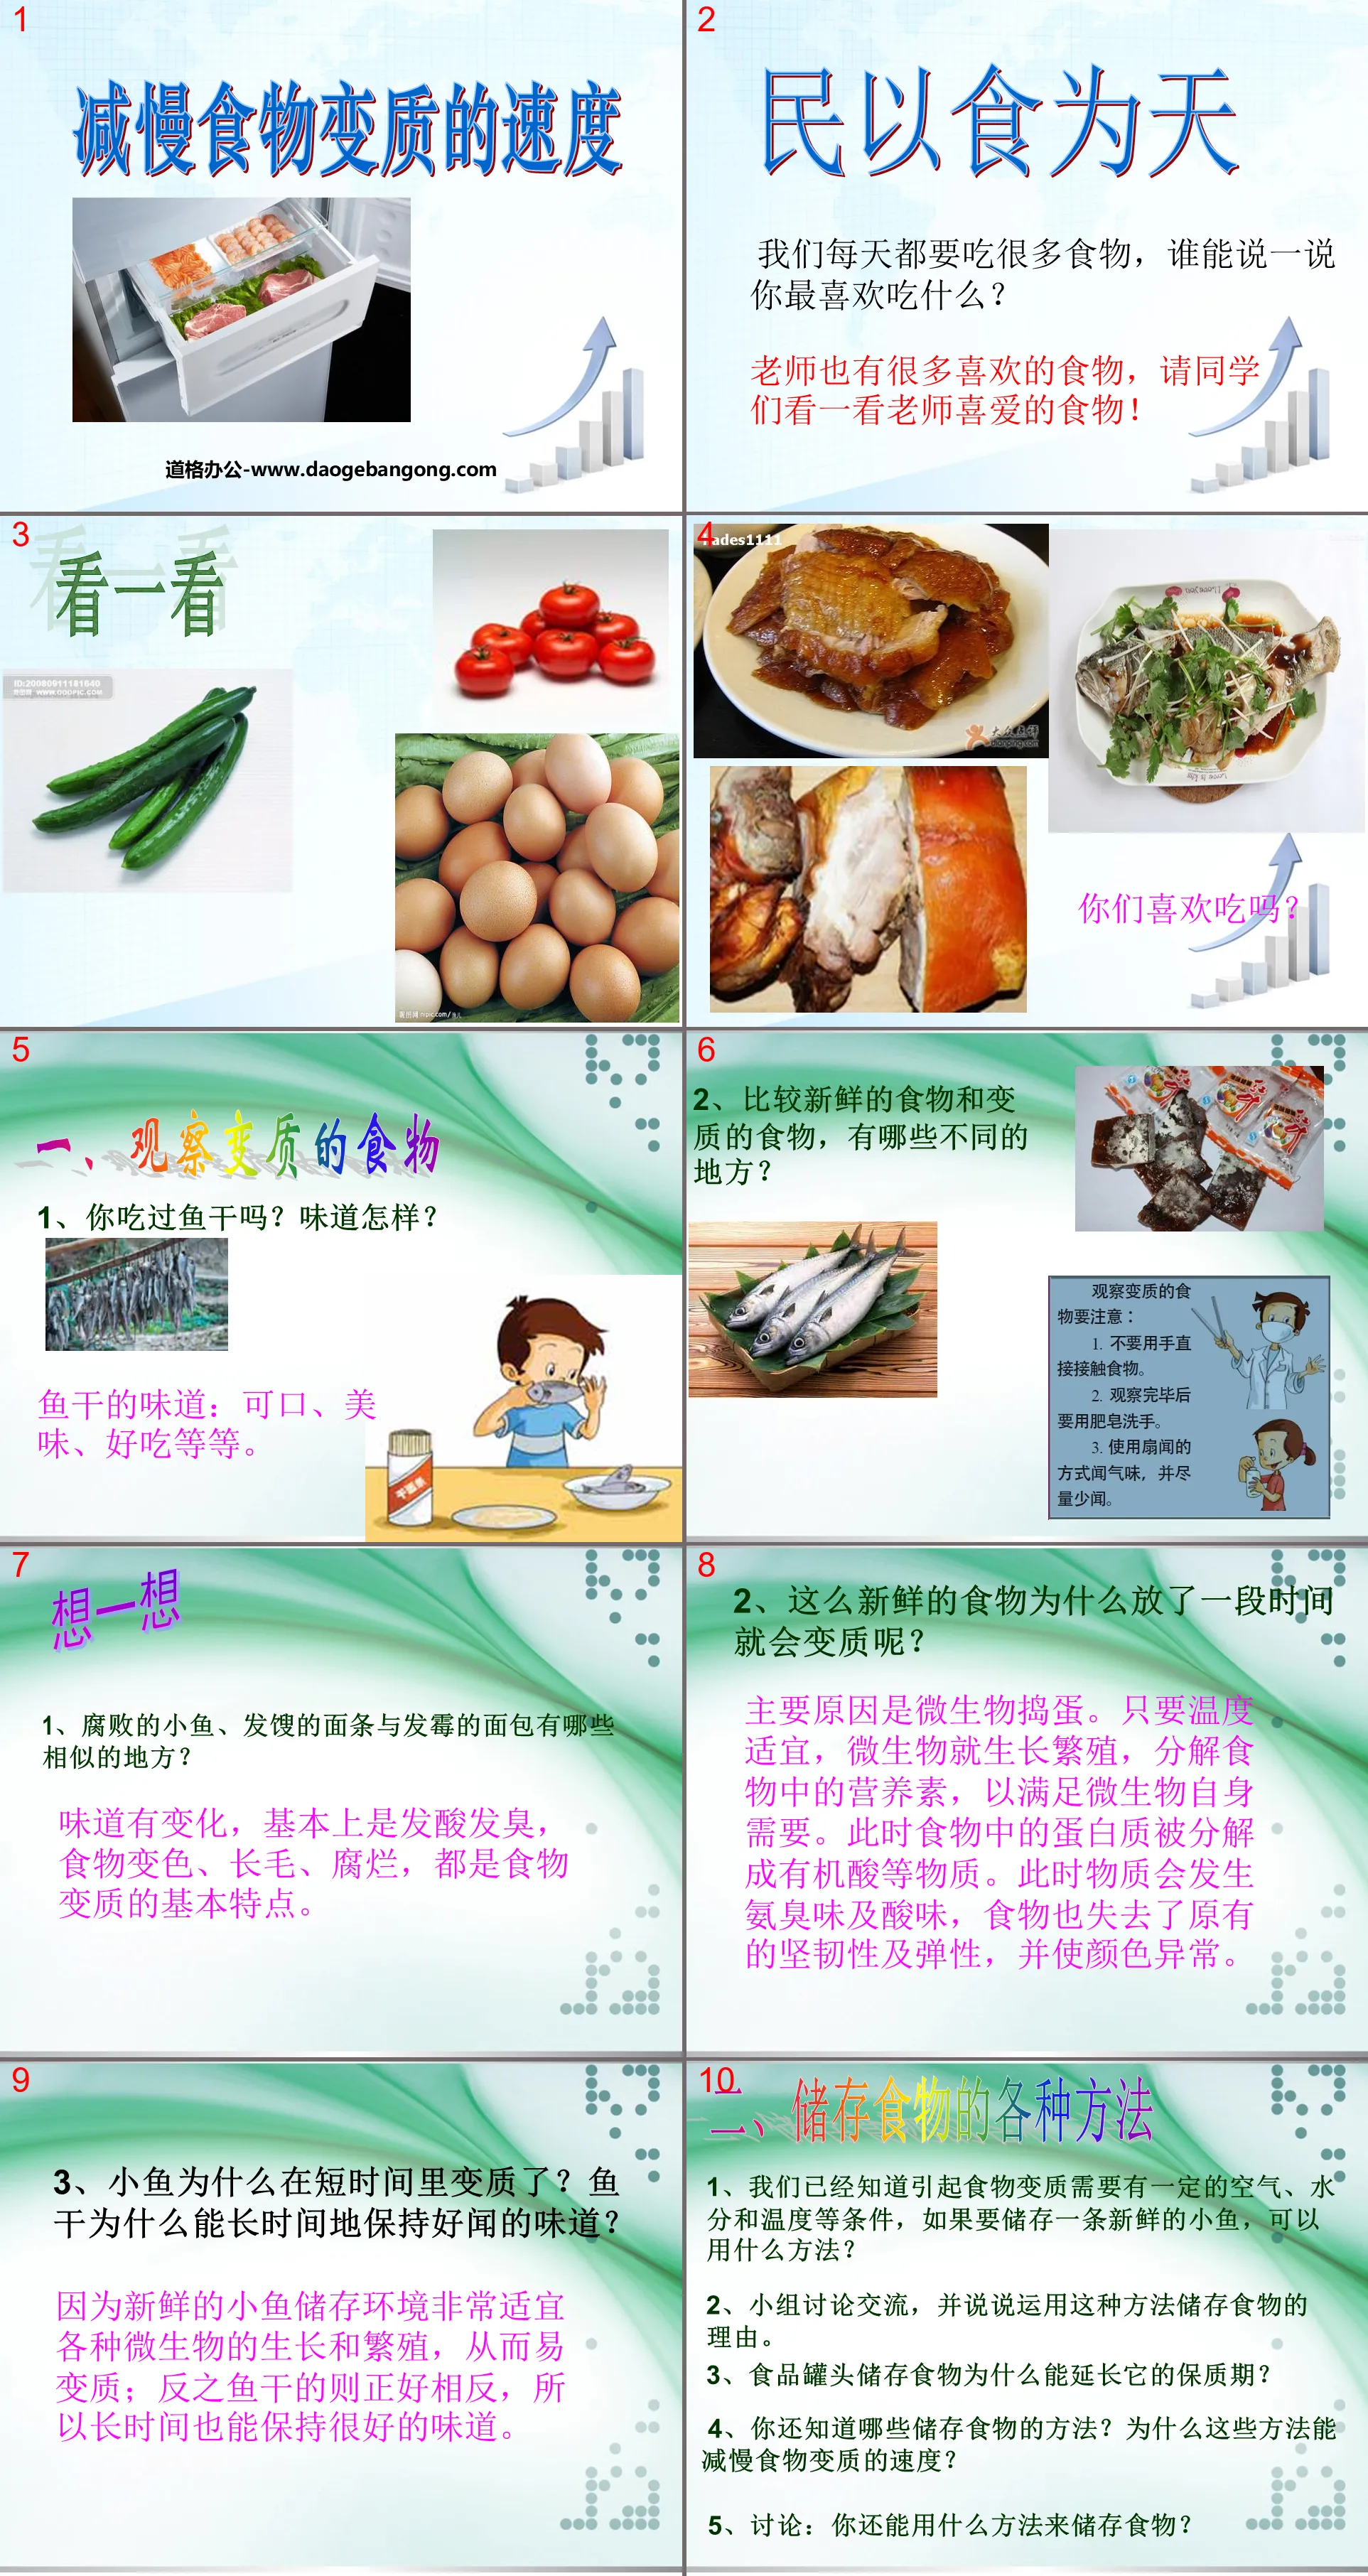 "Slowing down the speed of food spoilage" Food PPT courseware 2